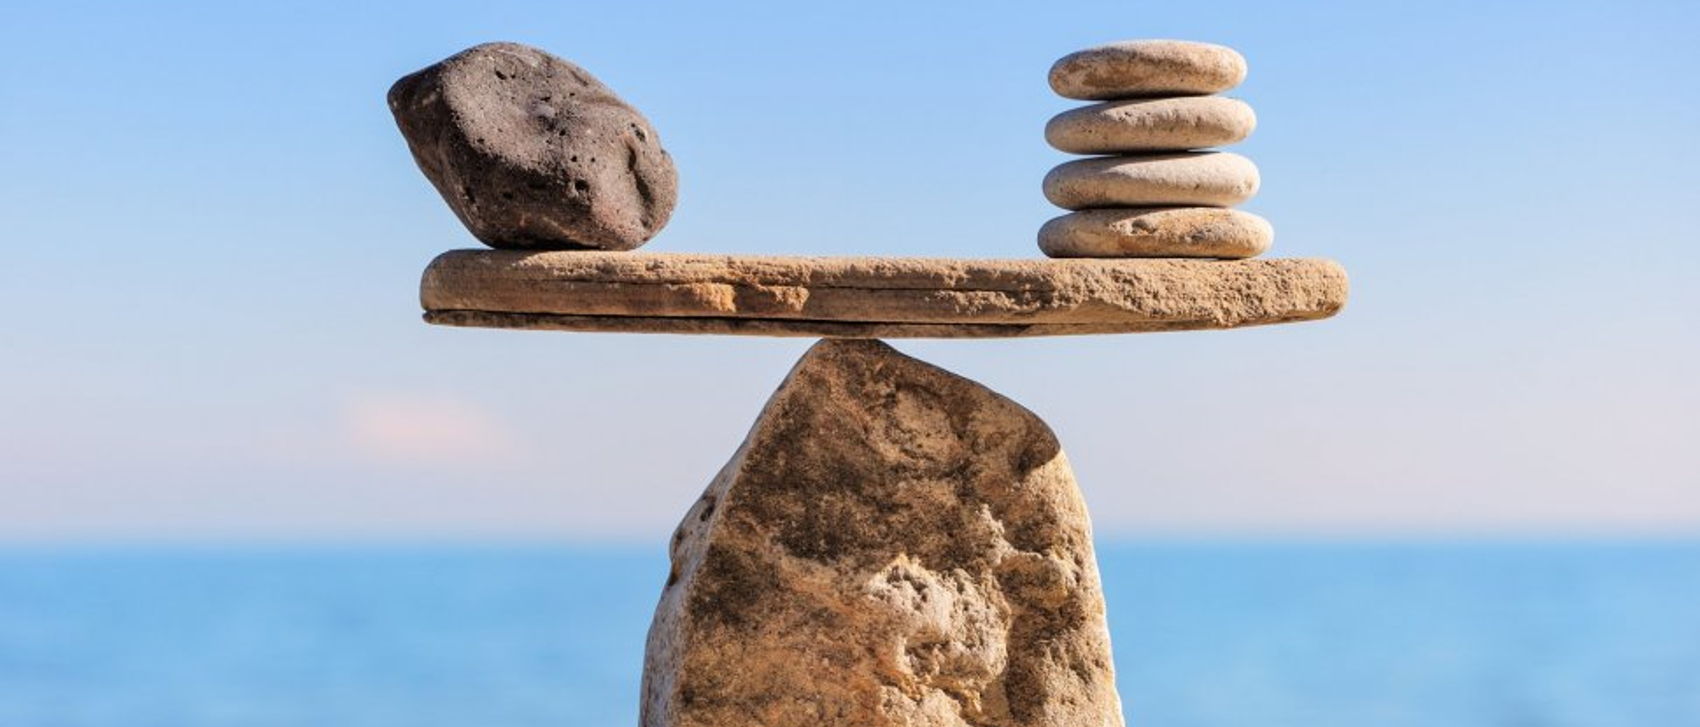 How to Stay in Balance and Control